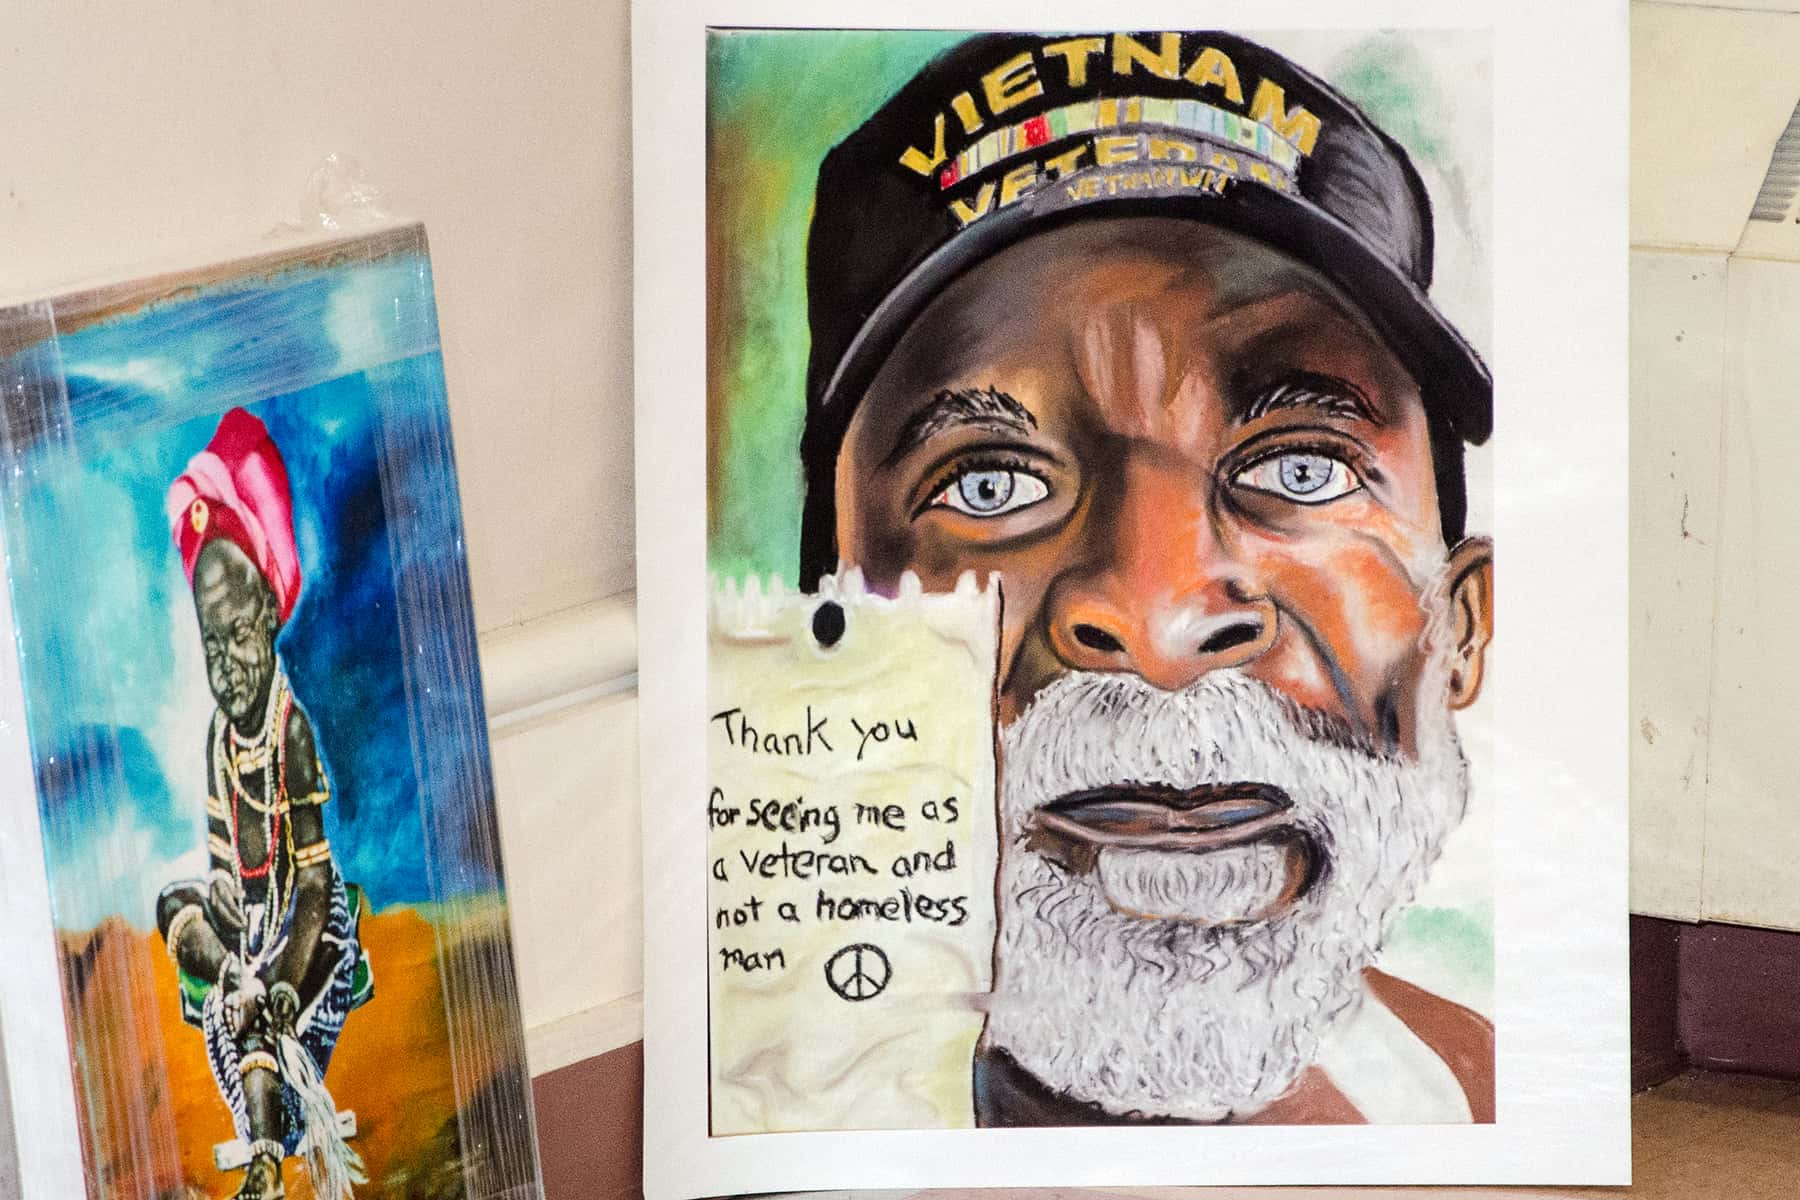 VA Arts competition offers Milwaukee veterans an avenue of expression